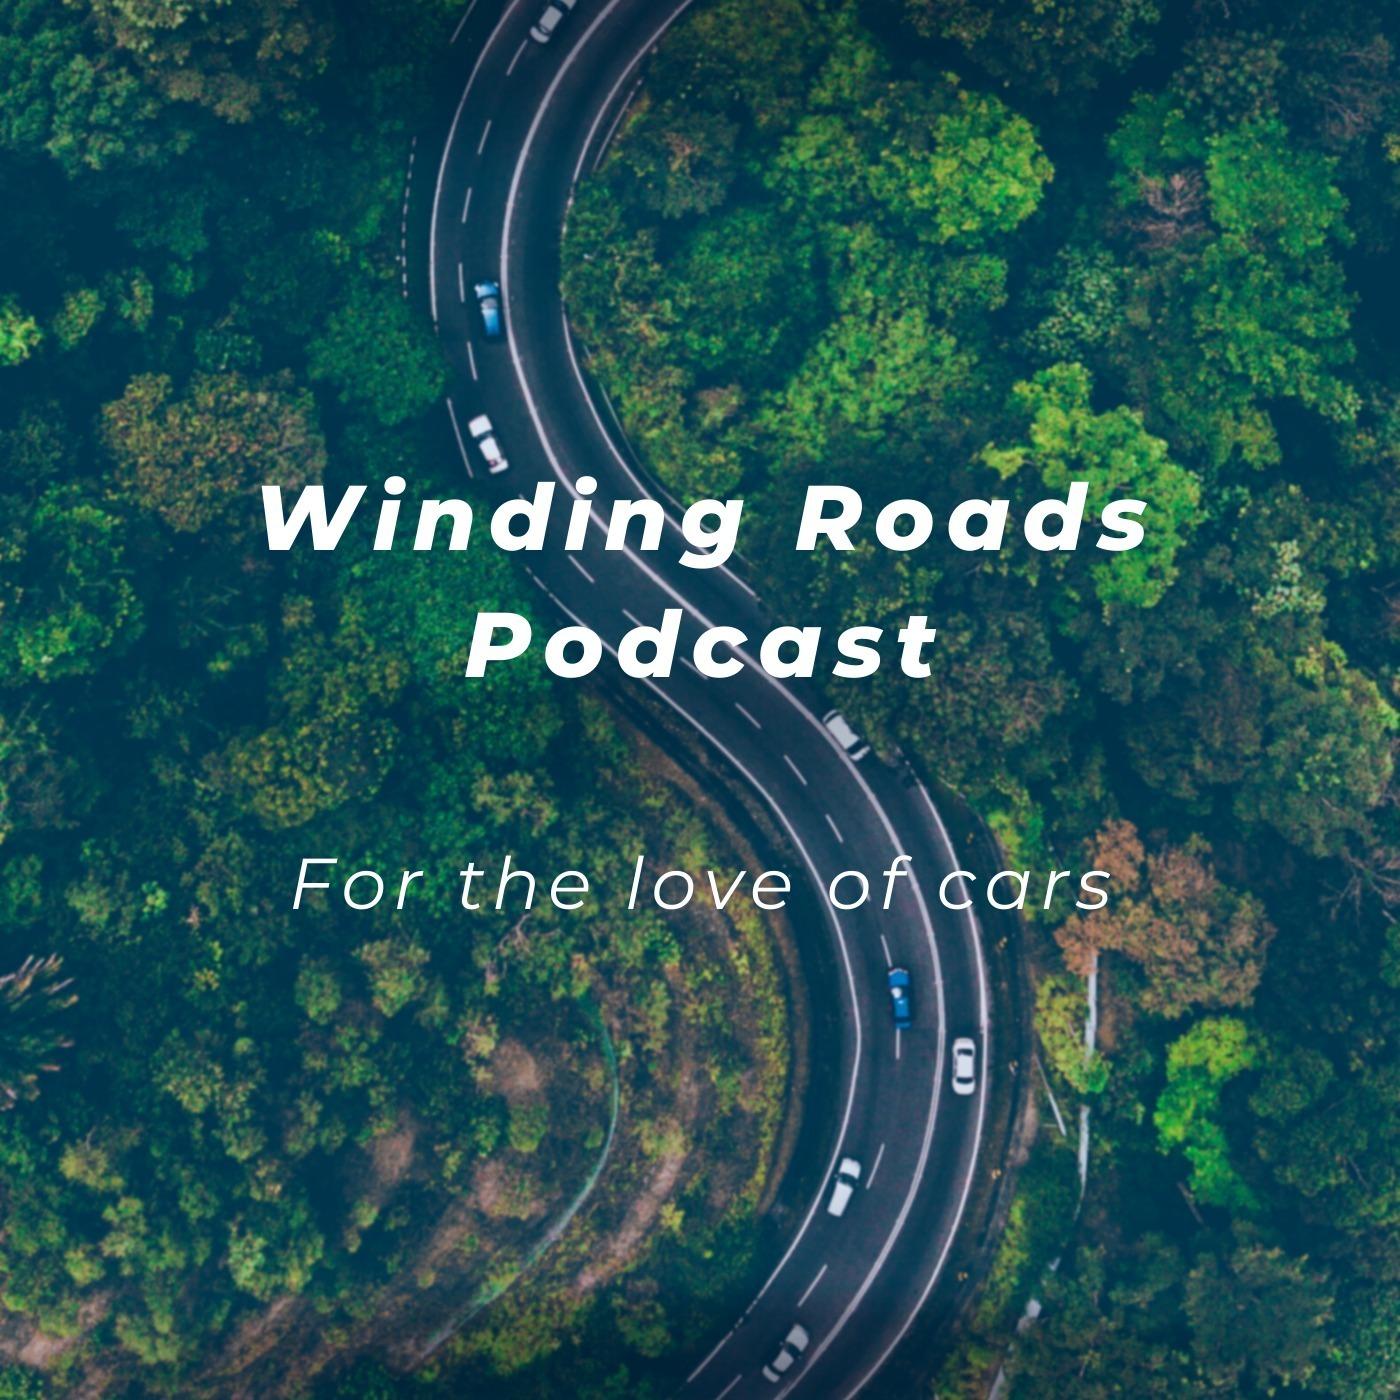 The Winding Roads Podcast